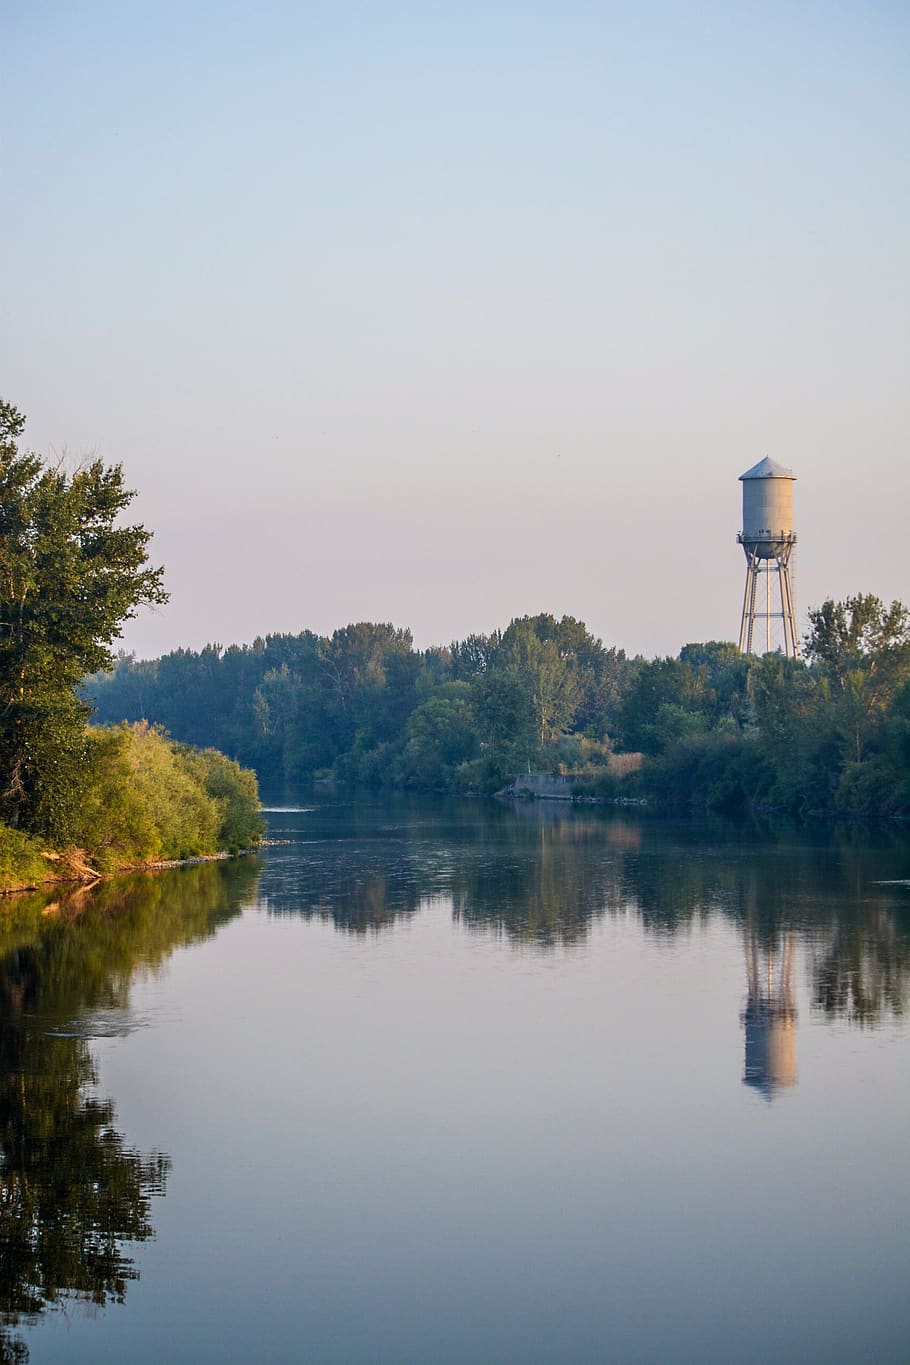 landscape, water tower, reflections, sky, landmark, nature, green, outdoor, river, color